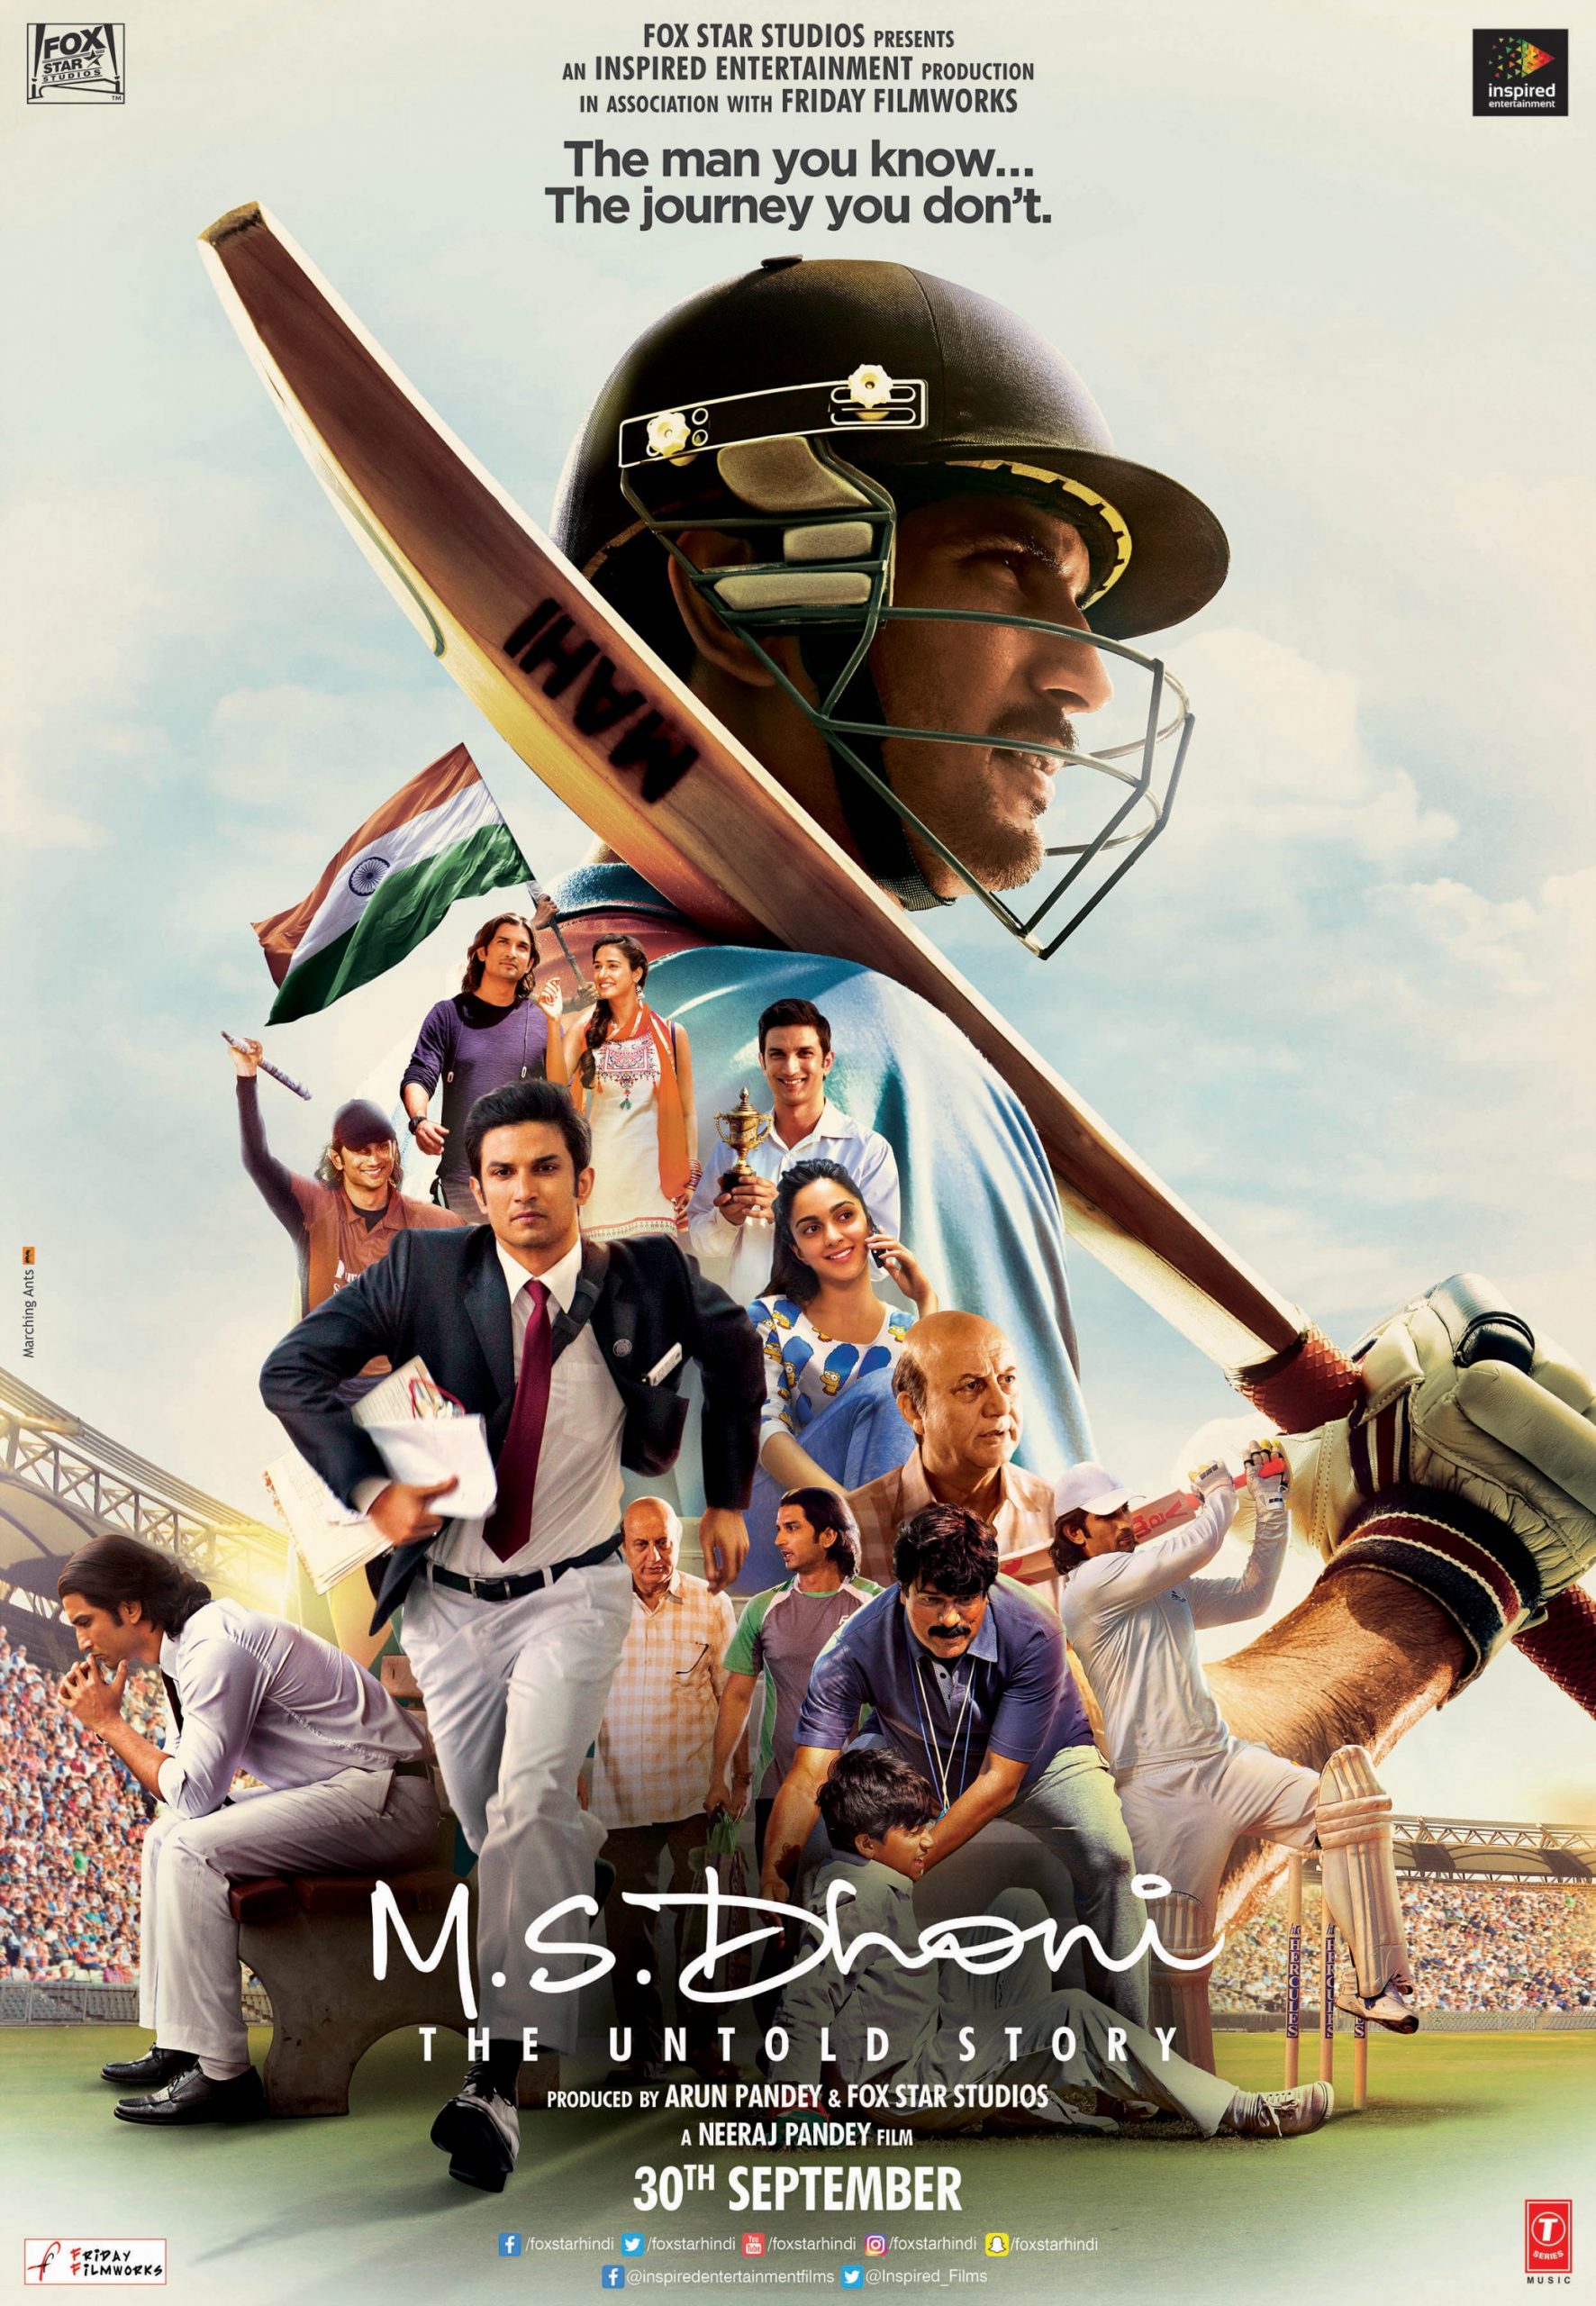 m-s-dhoni-the-untold-story-2016-844-poster.jpg